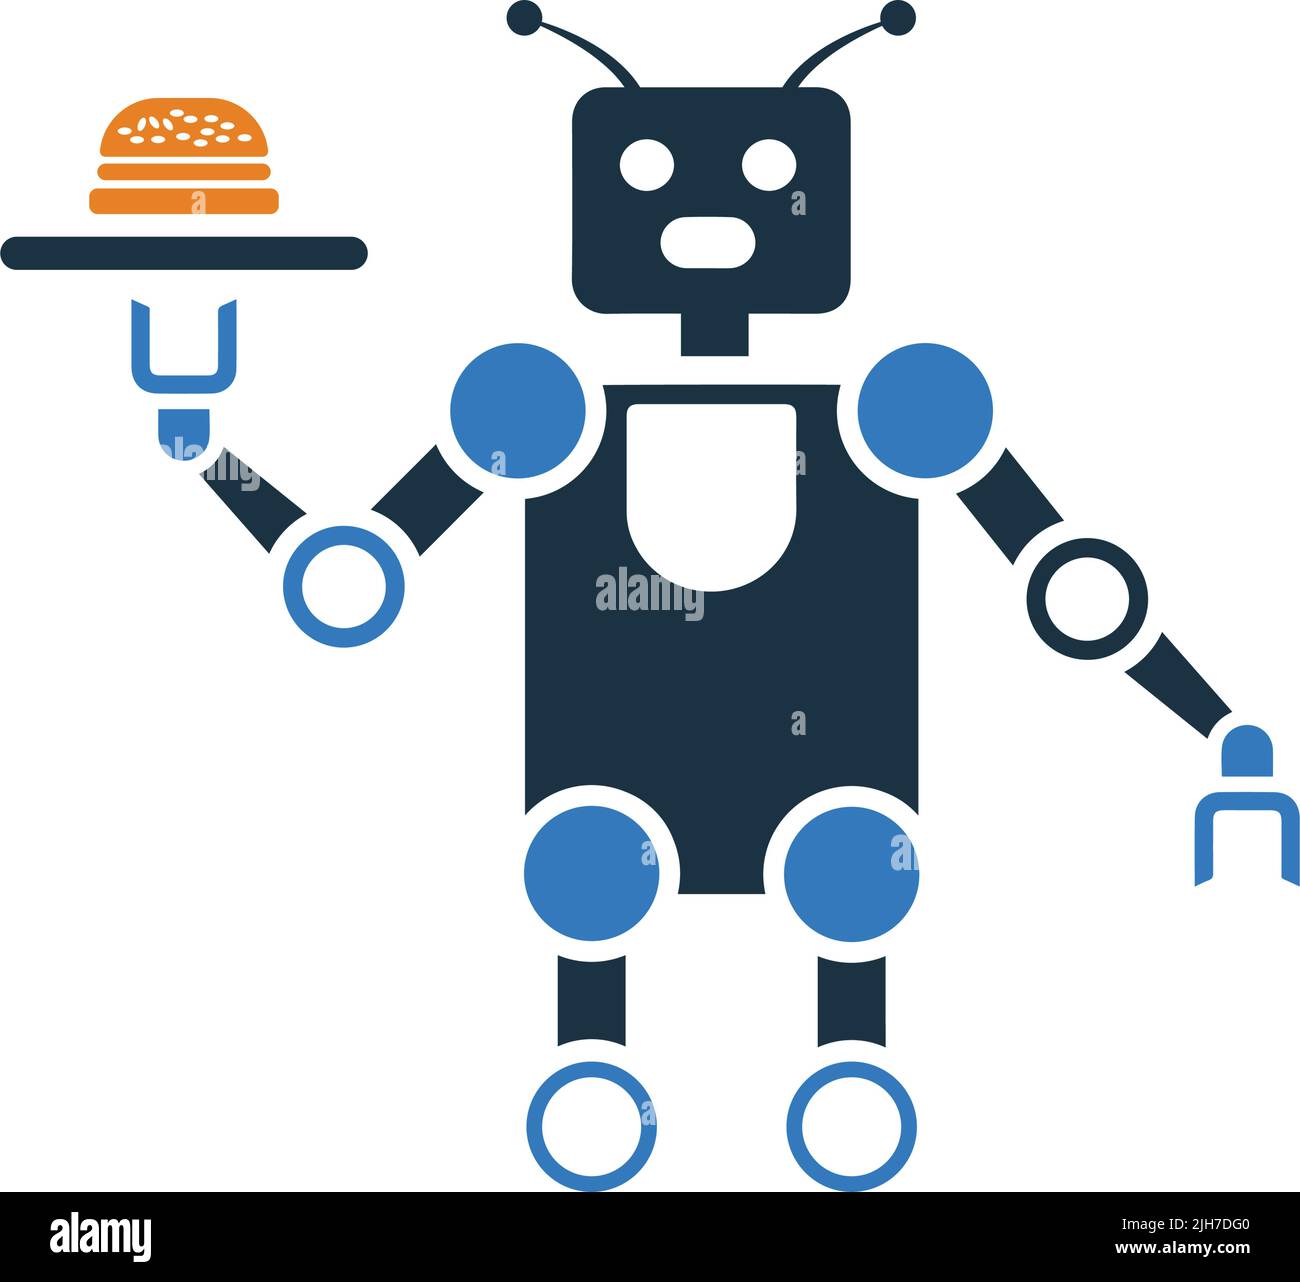 Automation, fast, food, robot icon - Vector EPS file. Perfect use for print media, web, stock images, commercial use or any kind of design project. Stock Vector